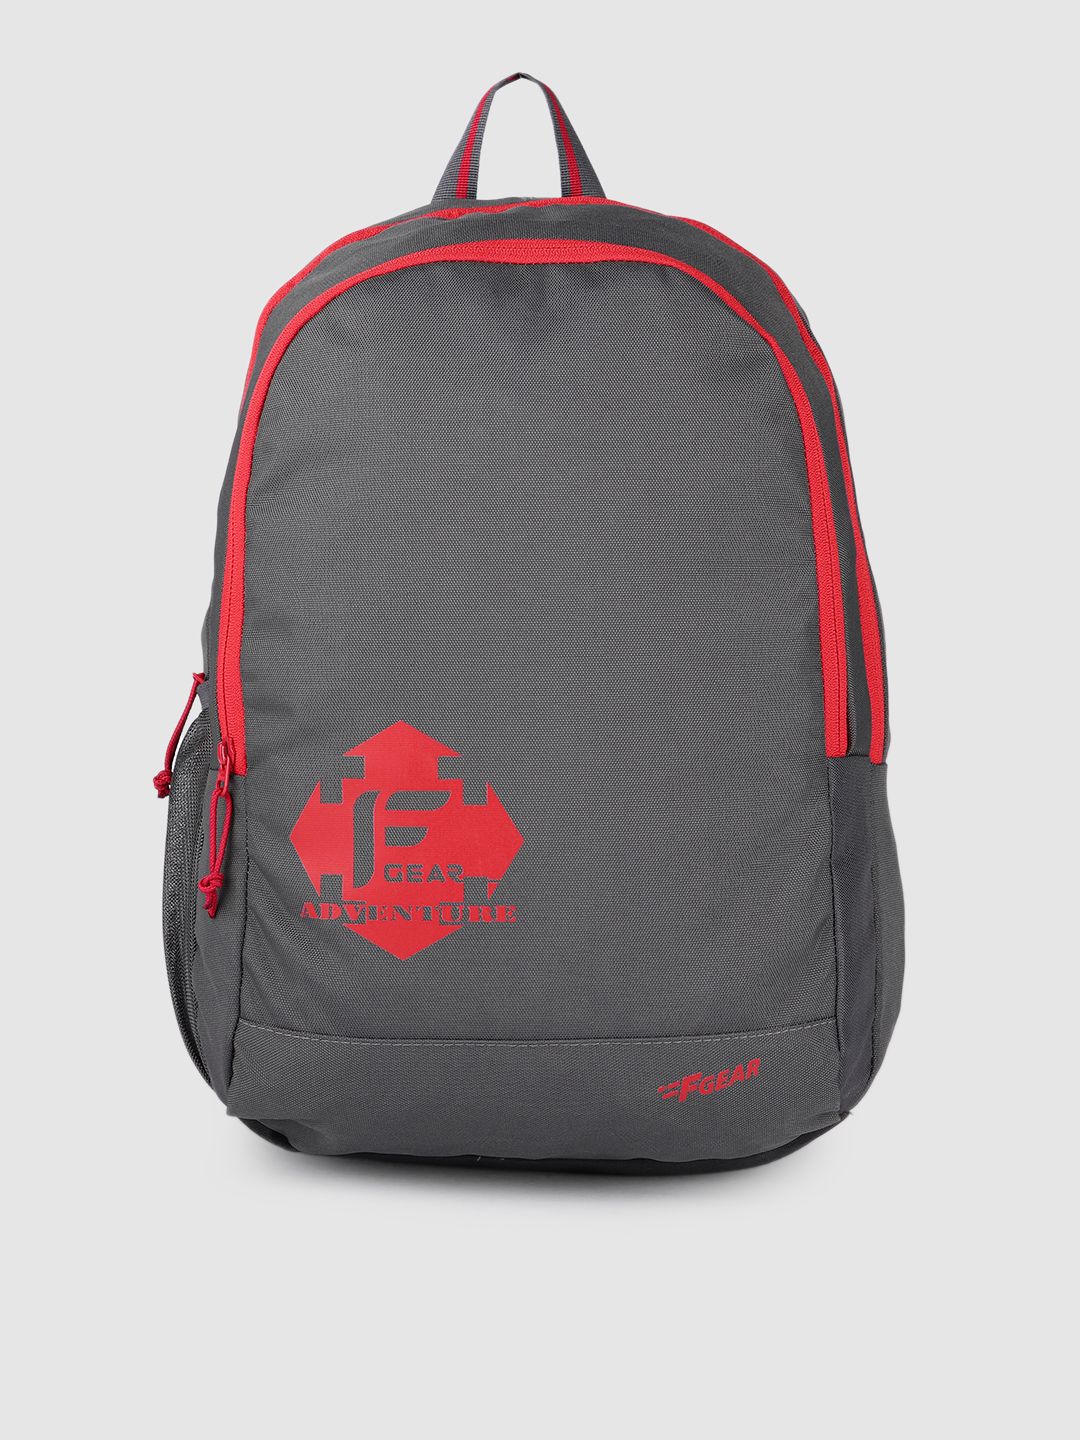 F Gear Unisex Grey & Red Brand Logo Laptop Backpack Price in India